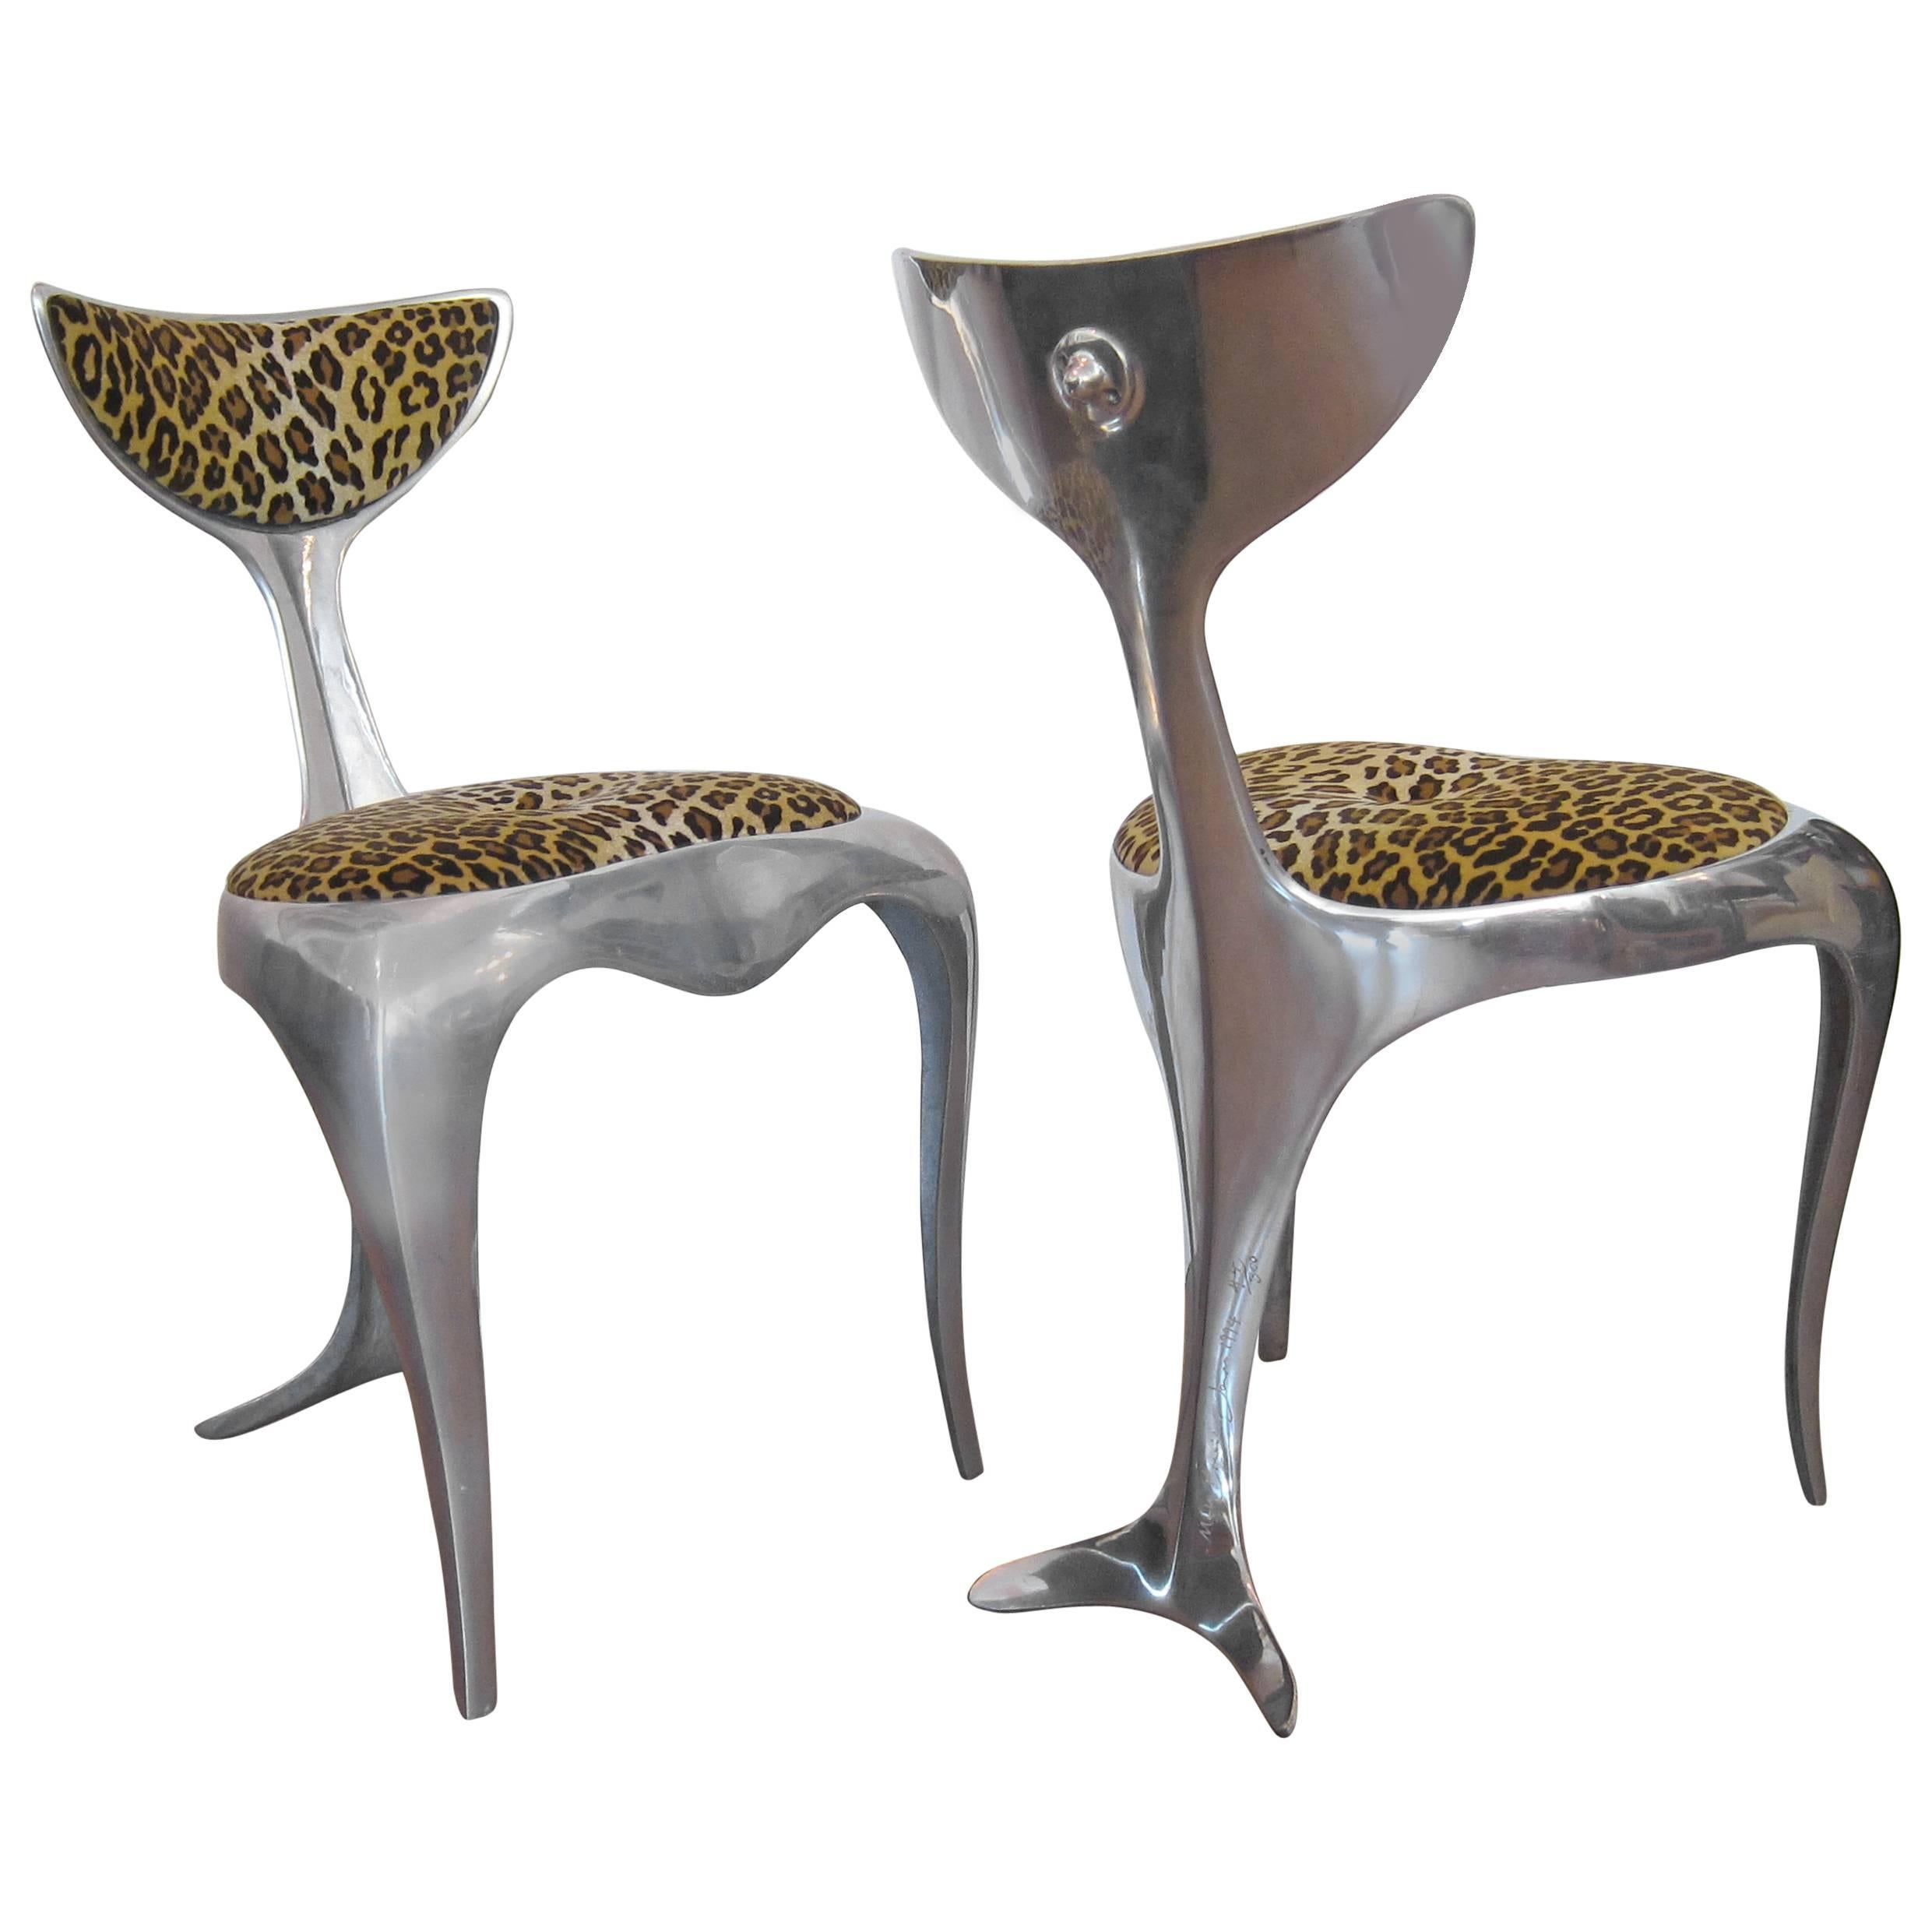 Pair of  Dolphin Tail Chairs by Mark Brazier-Jones